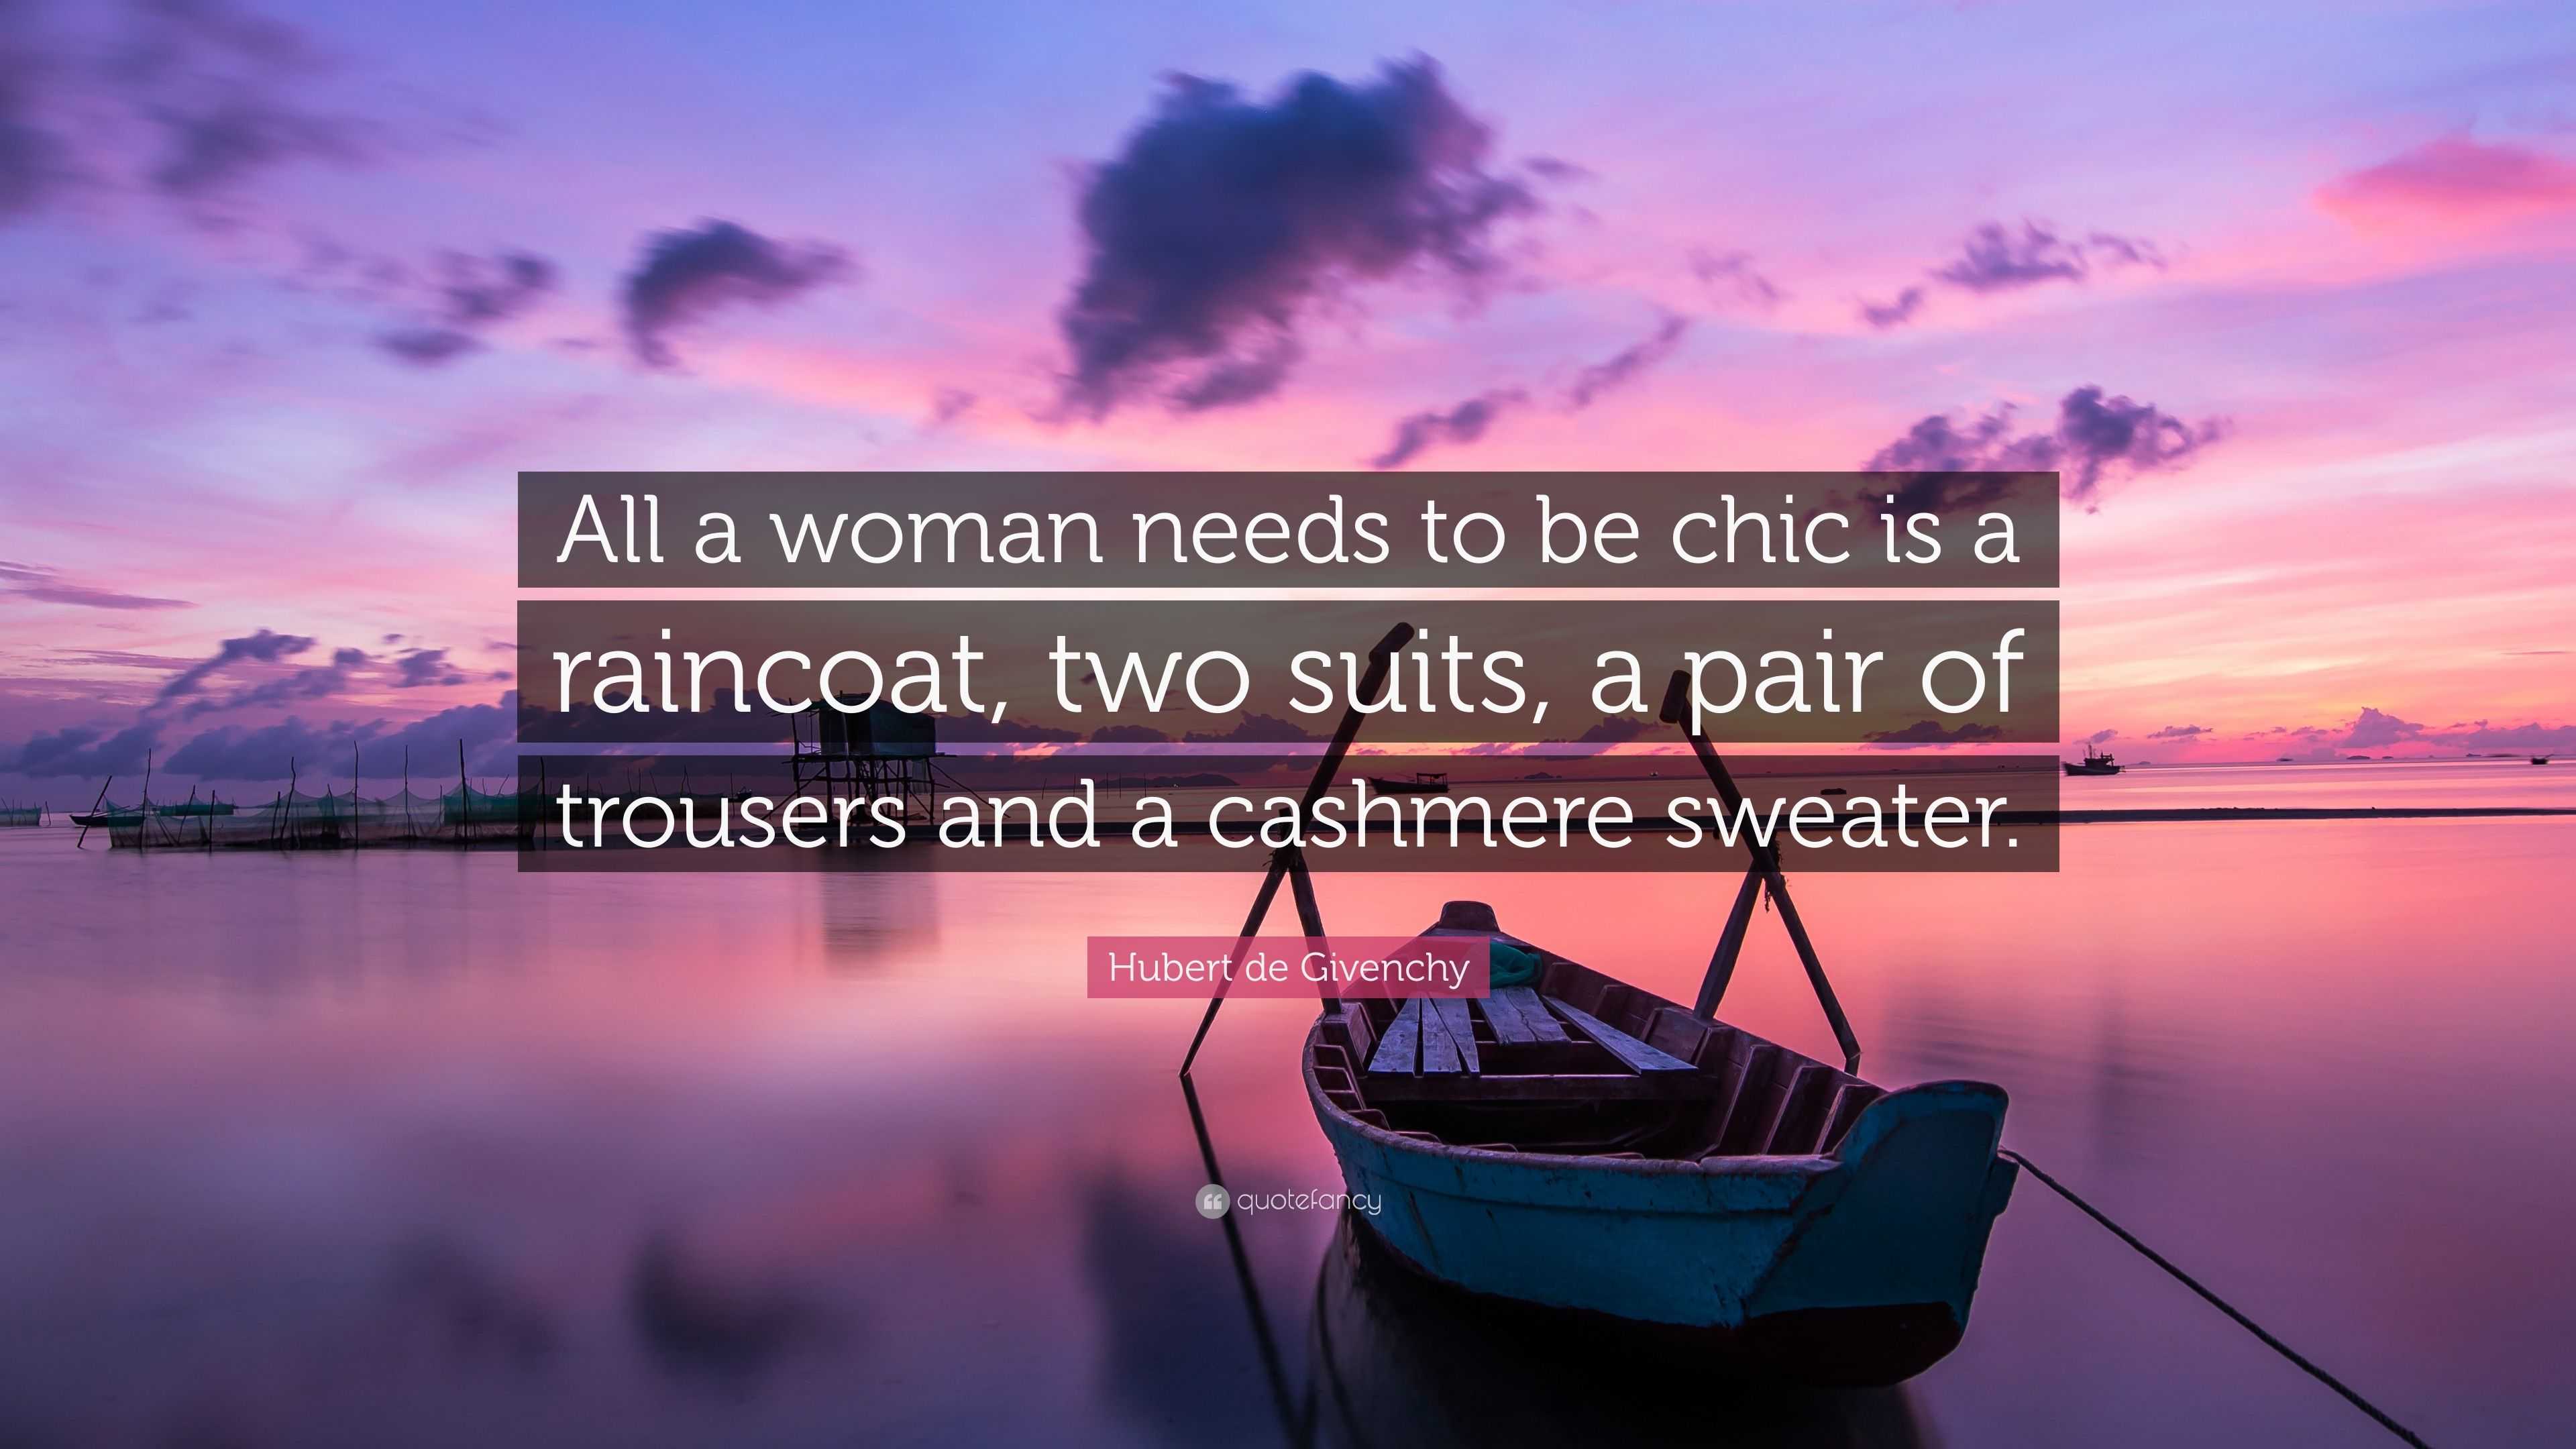 Hubert de Givenchy Quote: “All a woman needs to be chic is a